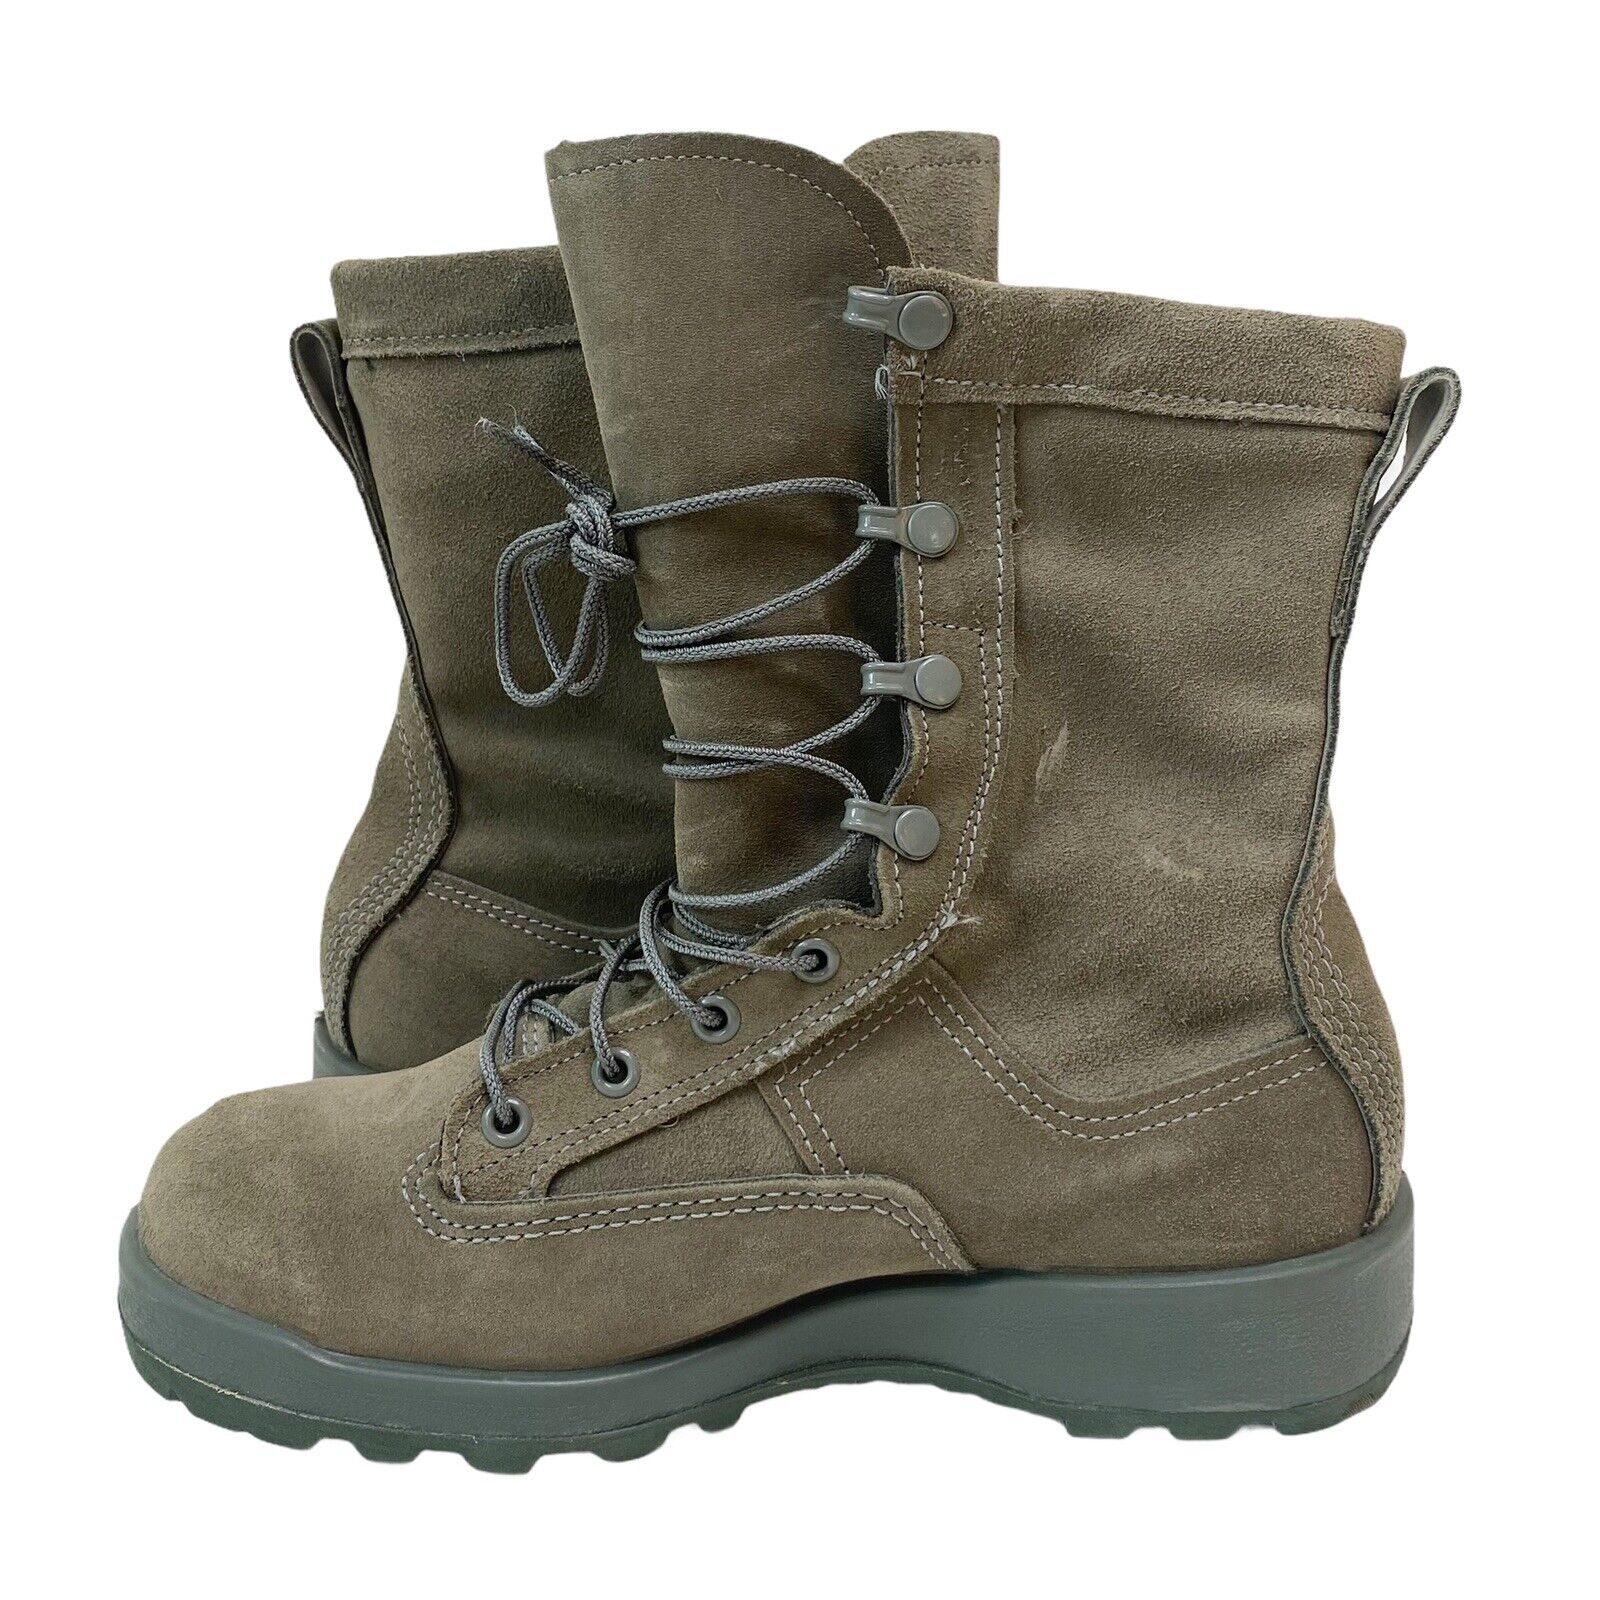 Belleville Tactical Sage Green Combat Army Boots 5.5 R Vibram Gore-Tex  Military